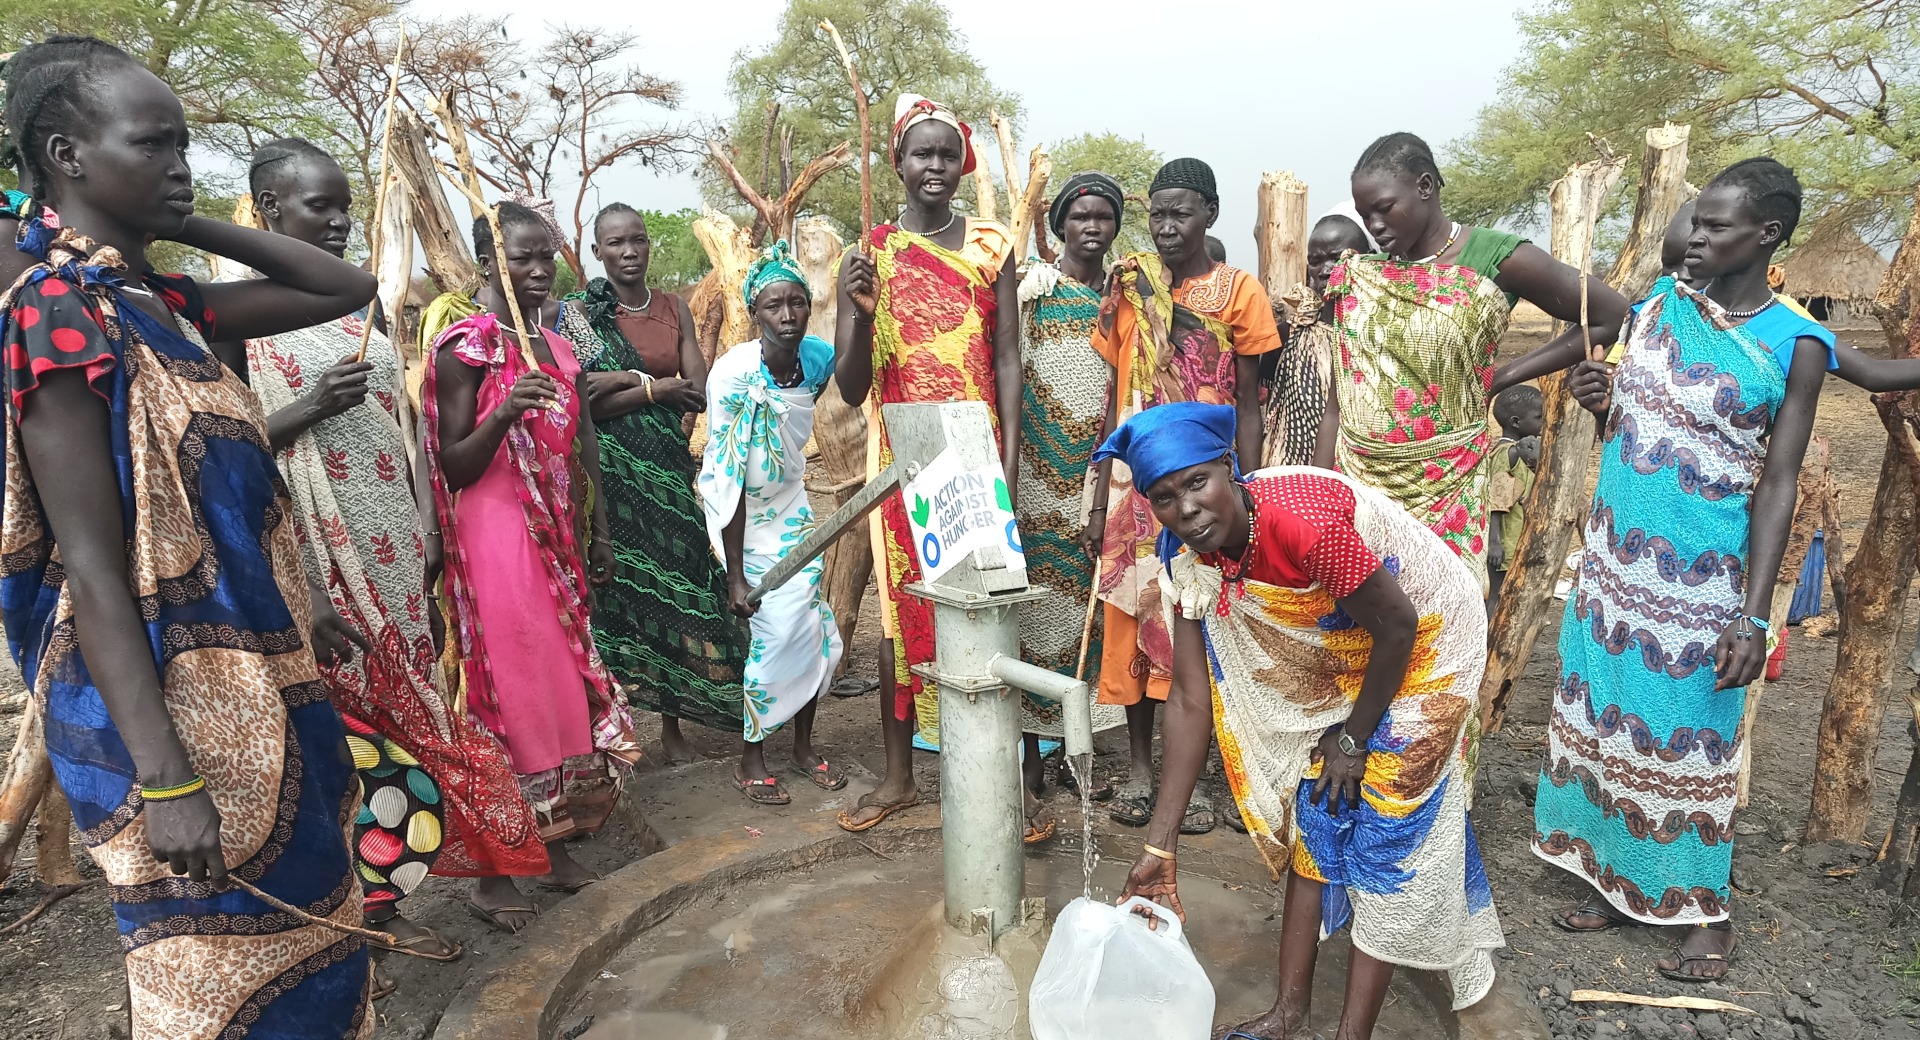 Women gather around a repaired water point in South Sudan.